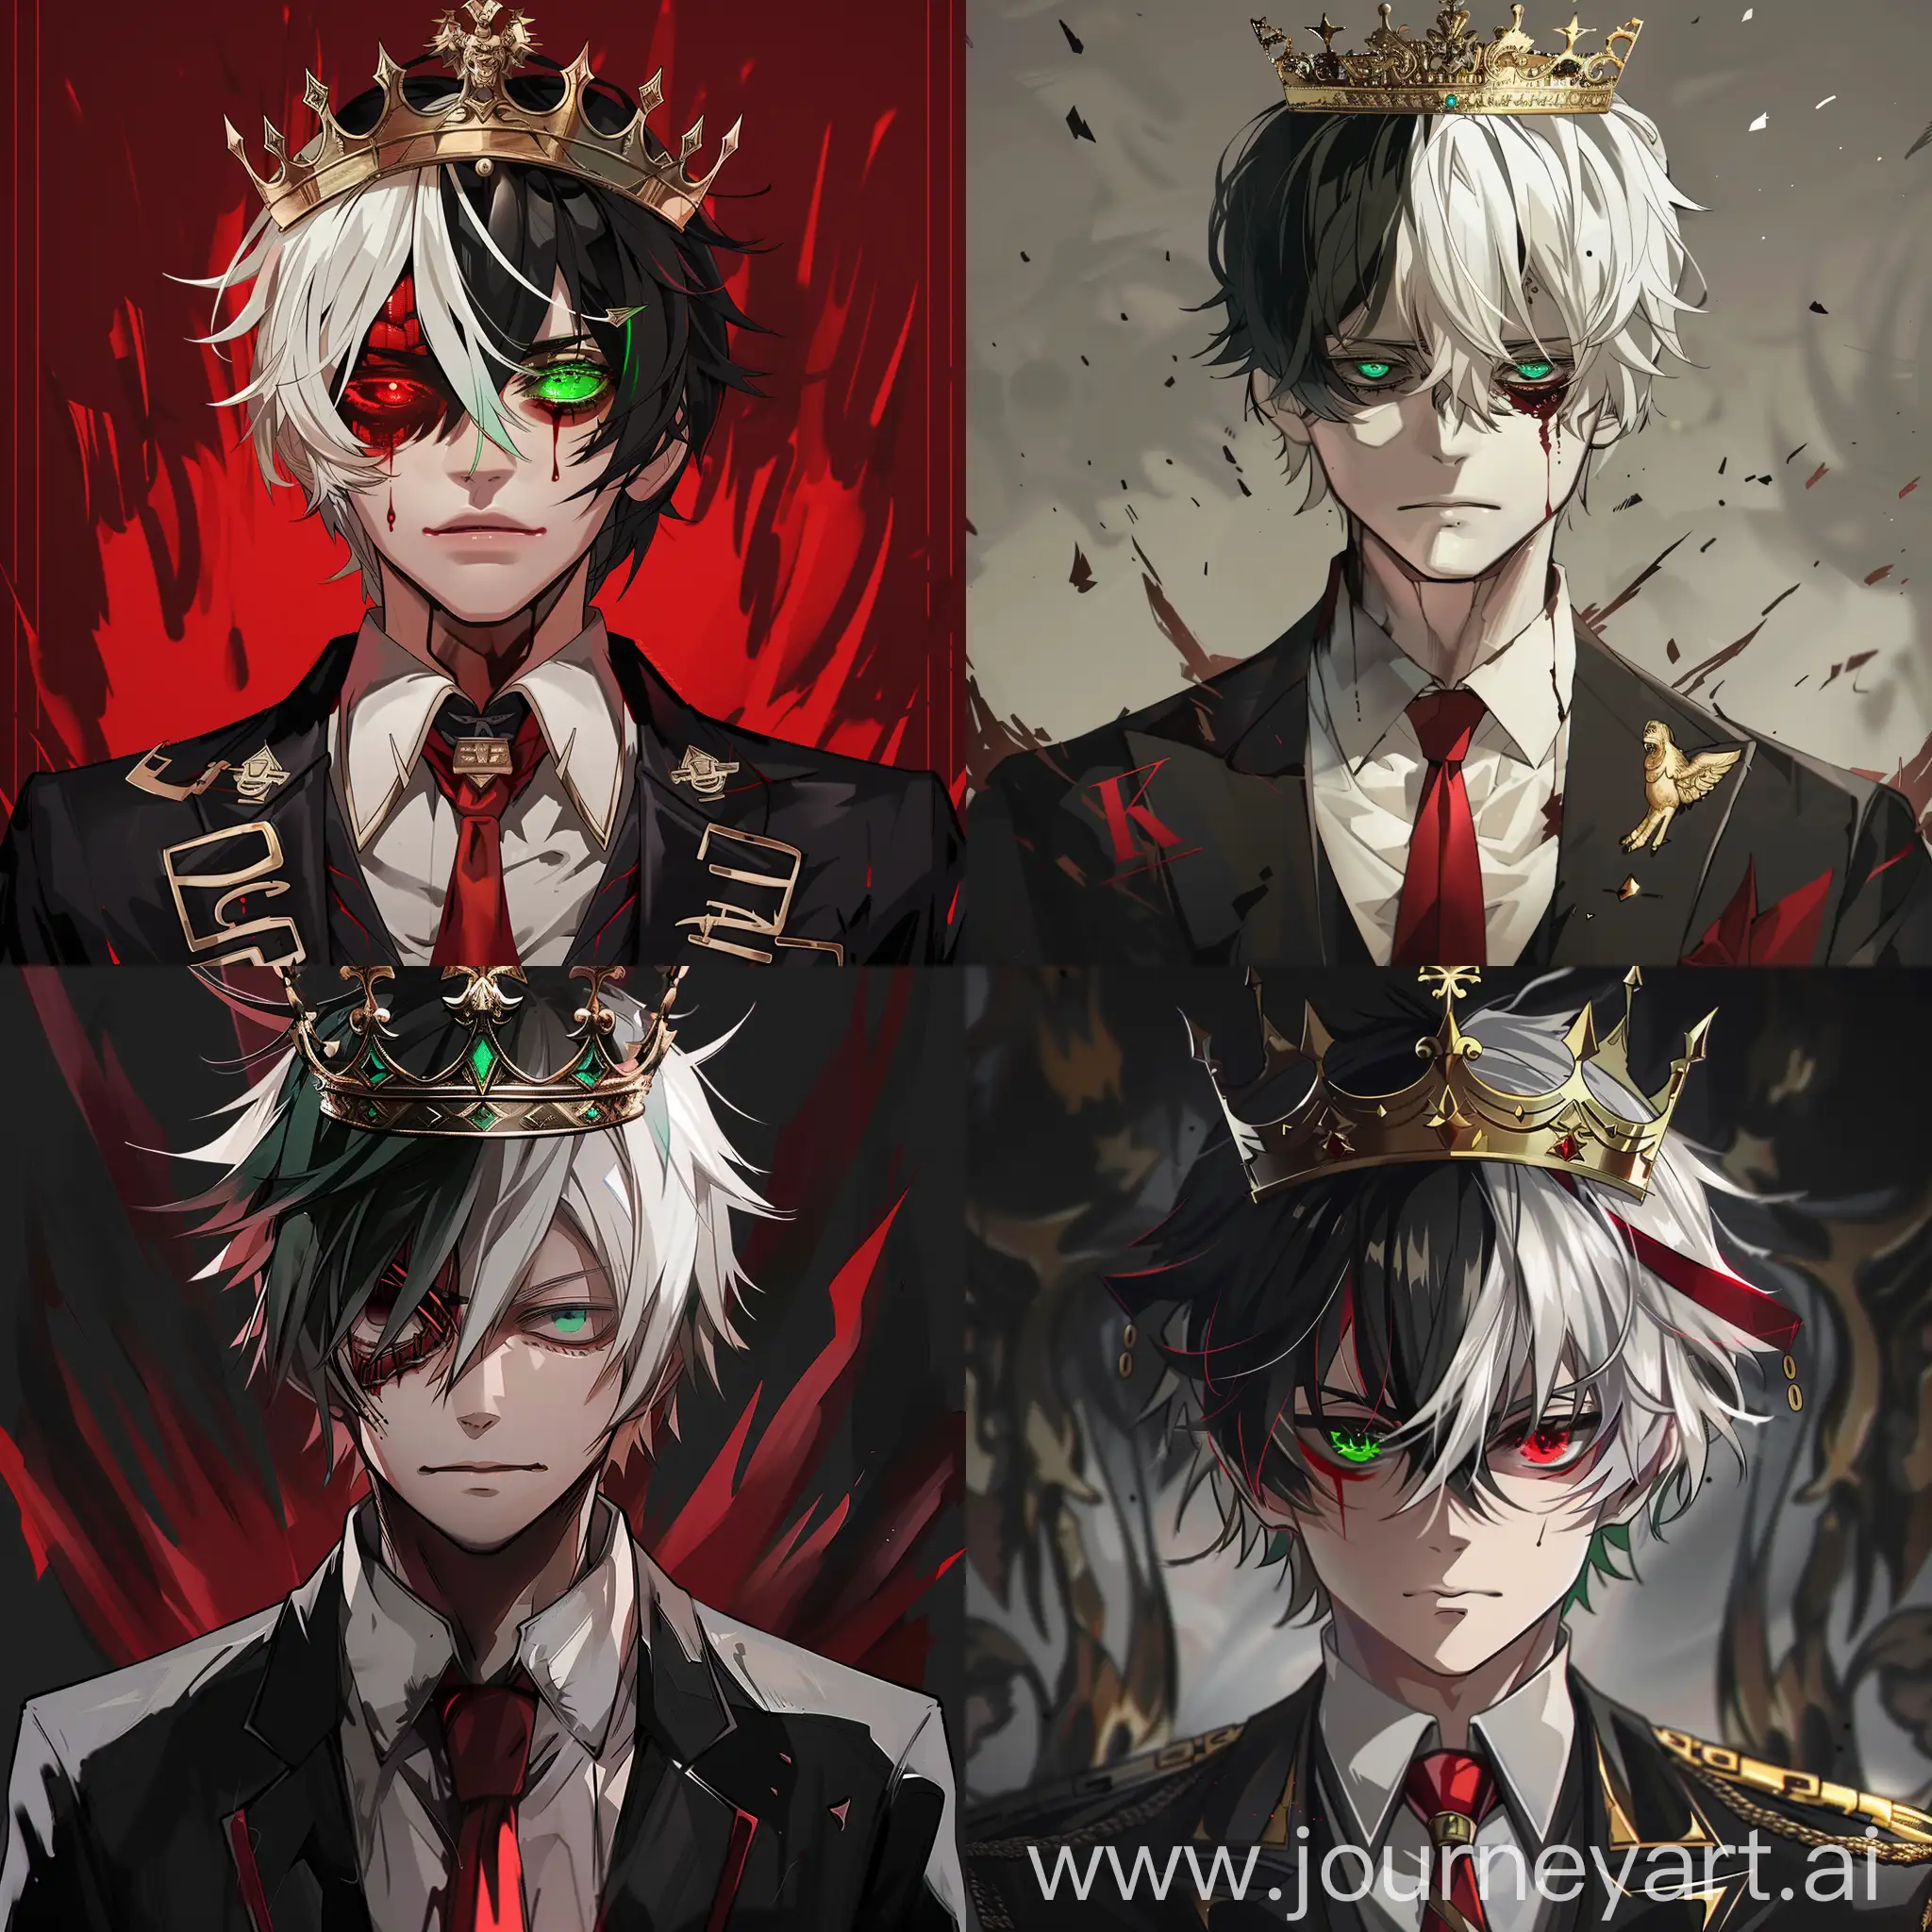 Anime-King-with-White-and-Black-Hair-Black-Suit-Red-Tie-and-DualColored-Eyes